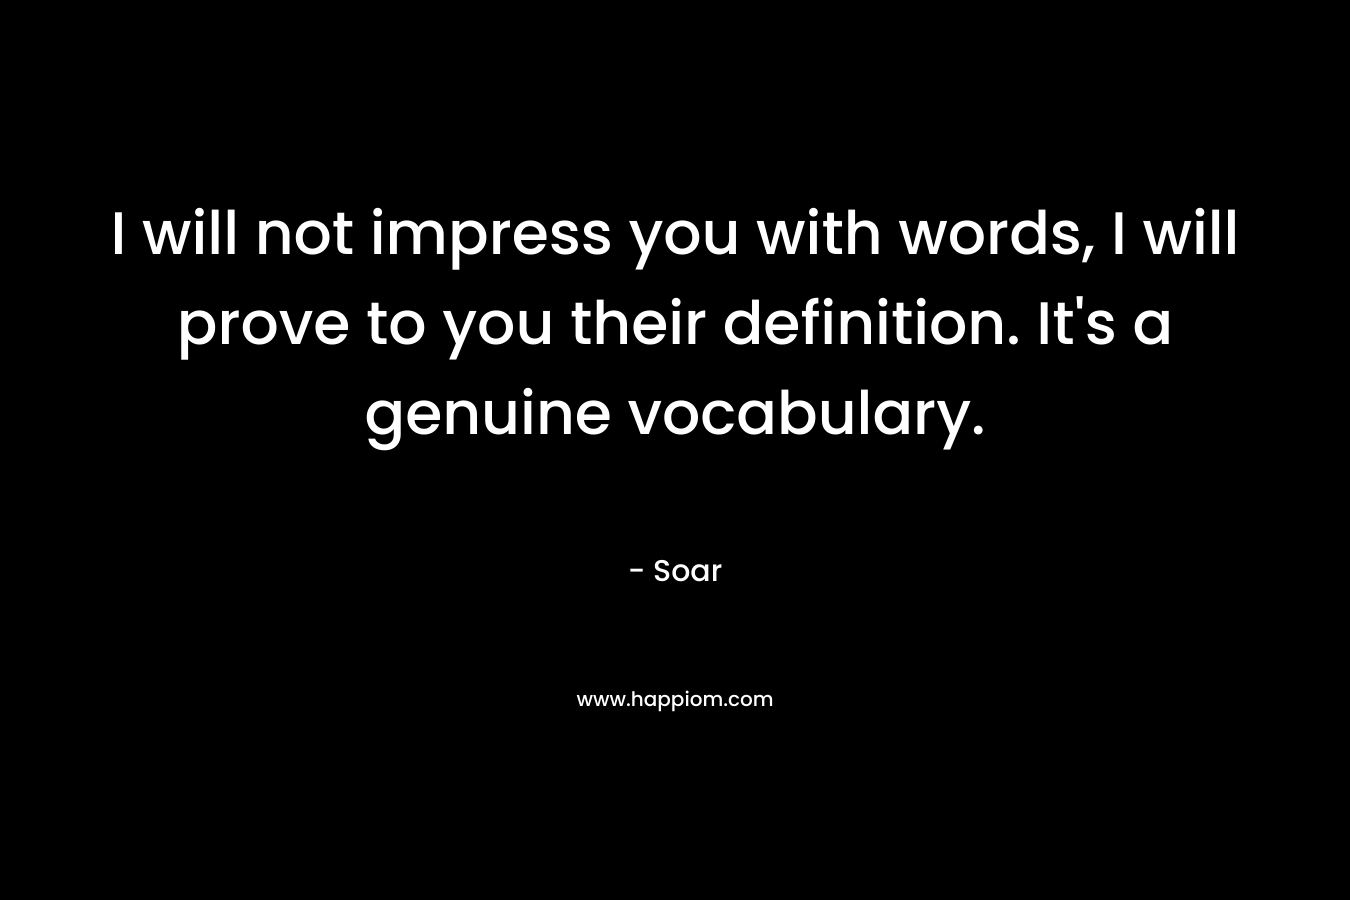 I will not impress you with words, I will prove to you their definition. It’s a genuine vocabulary. – Soar